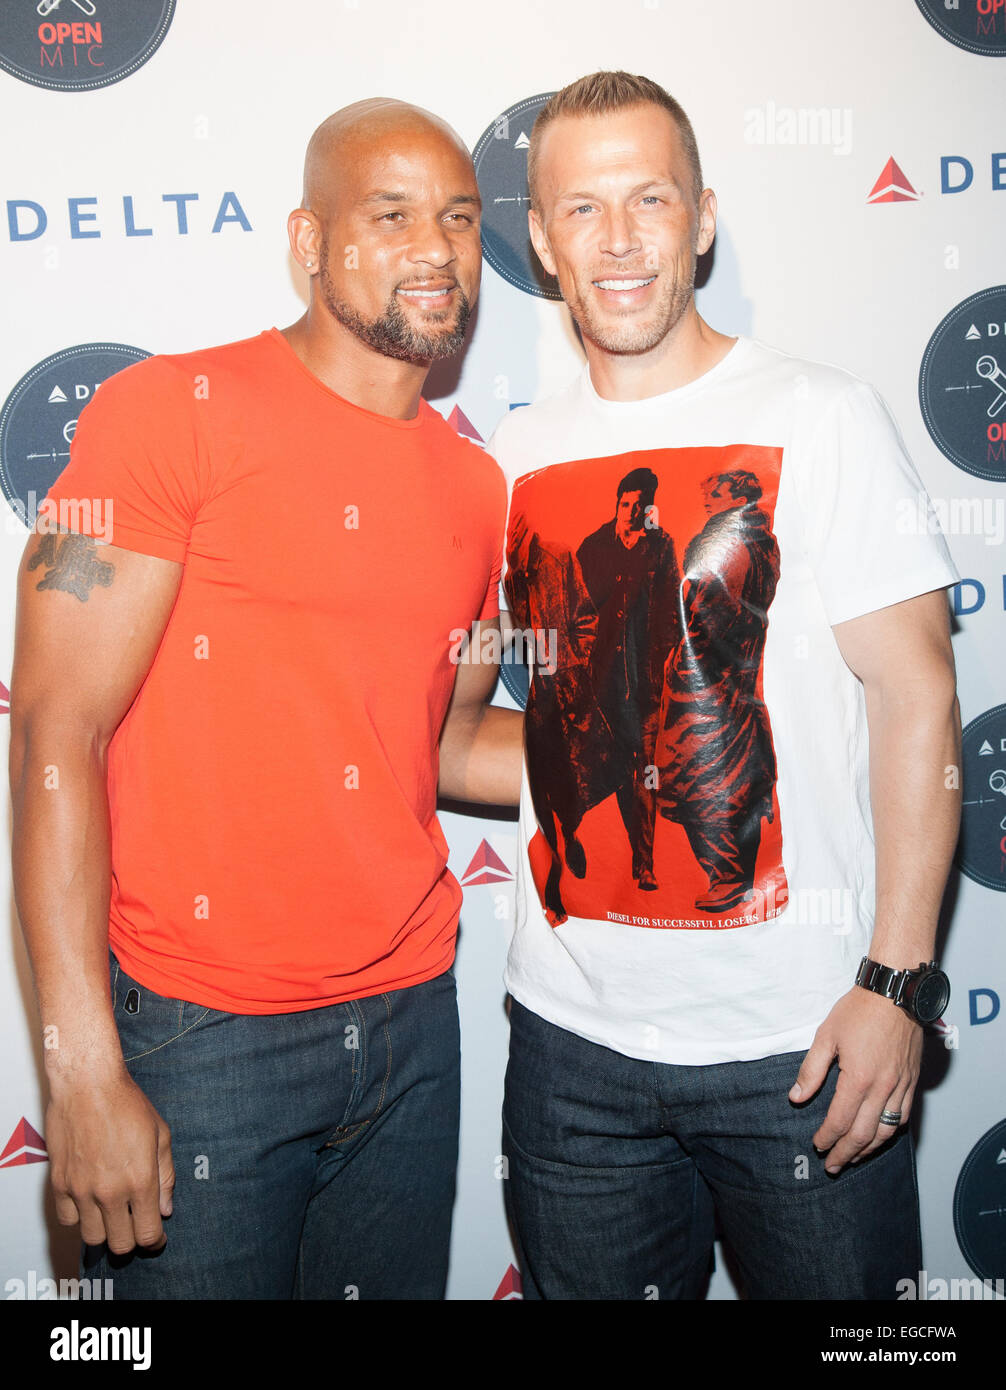 Delta Air Lines karaoke event, 'Delta Open Mike' at Arena Featuring: Shaun T,Scott Blokker Where: New York City, New York When: 20 Aug 2014 Stock Photo